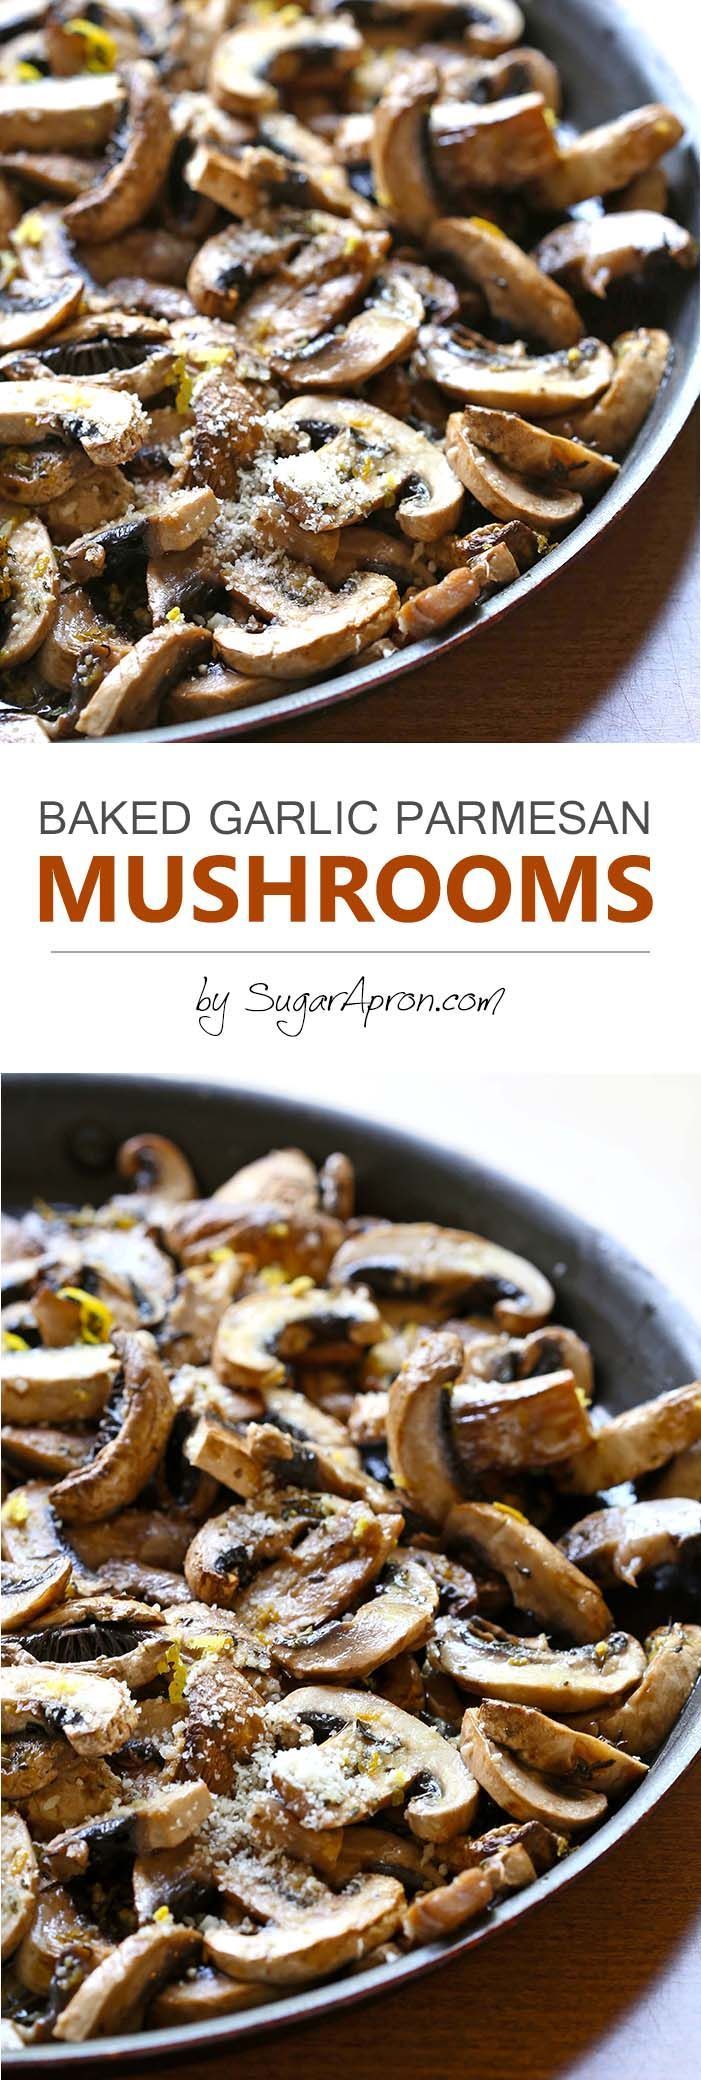 Baked Garlic Parmesan Mushrooms is one of those everyone-should-know-how-to-make recipes. It’s easy and comes together quickly.